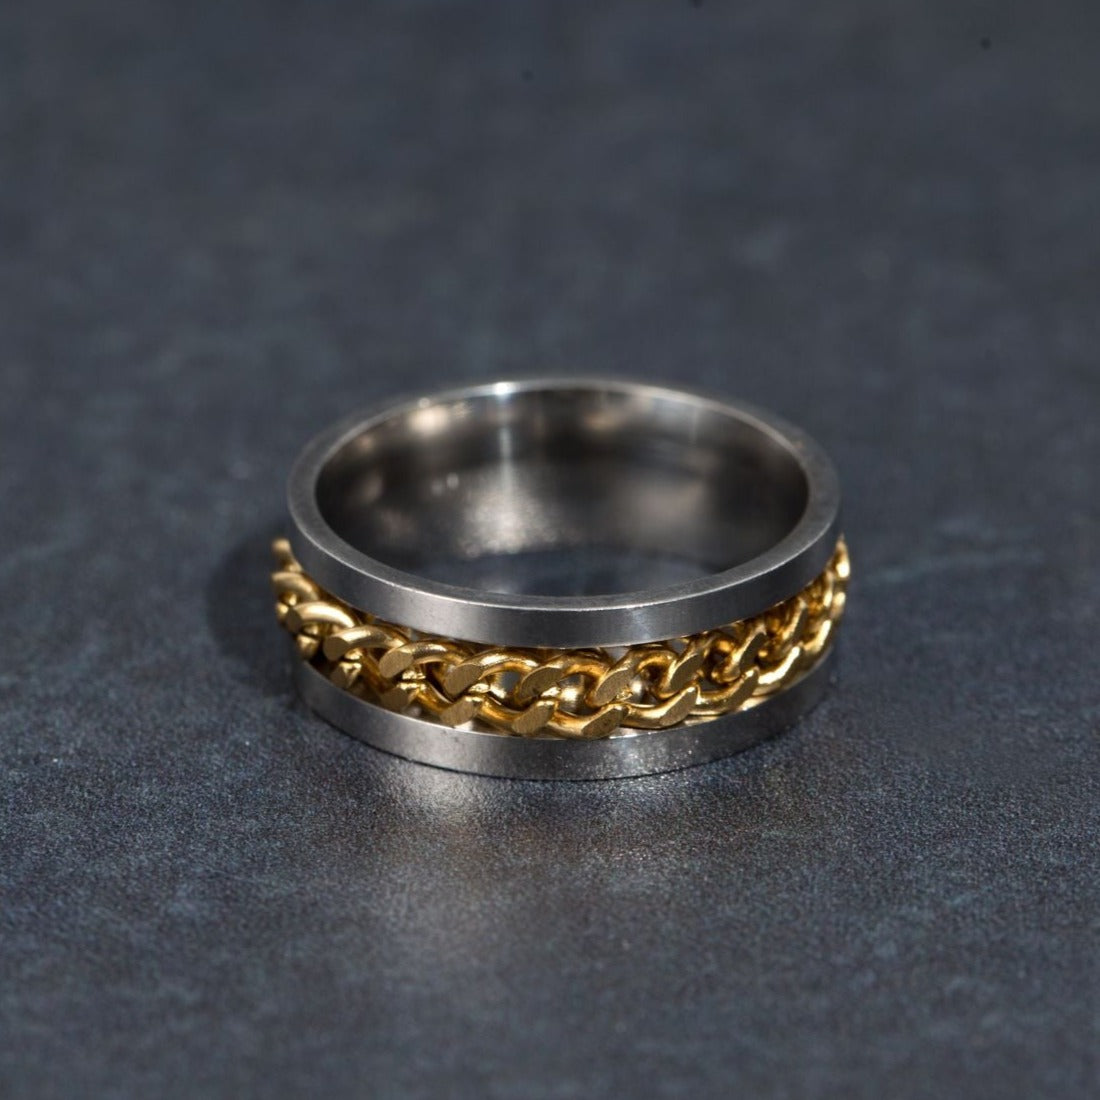 CHAIN RING